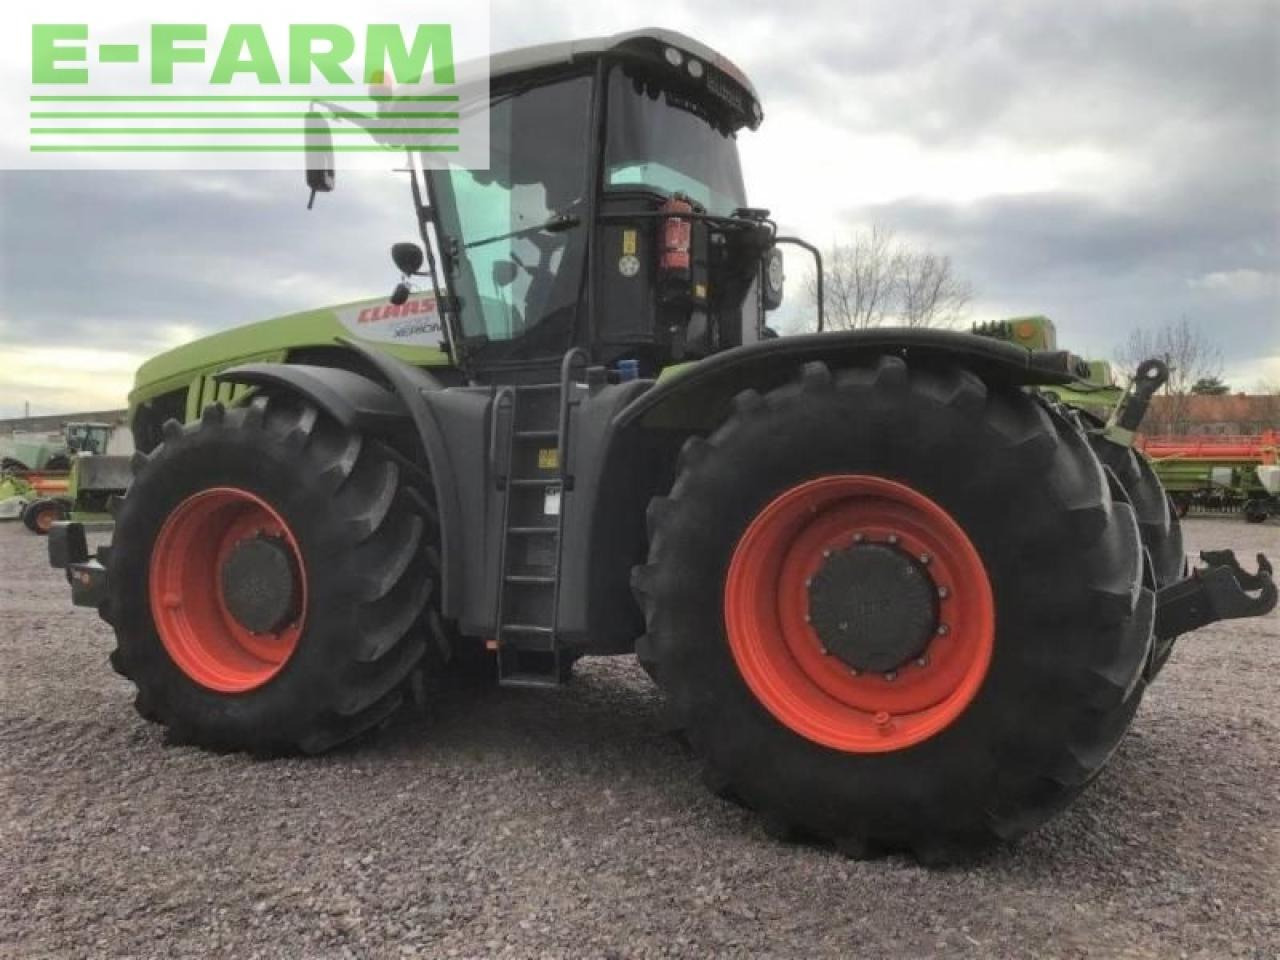 Tractor CLAAS xerion 5000 trac vc TRAC VC